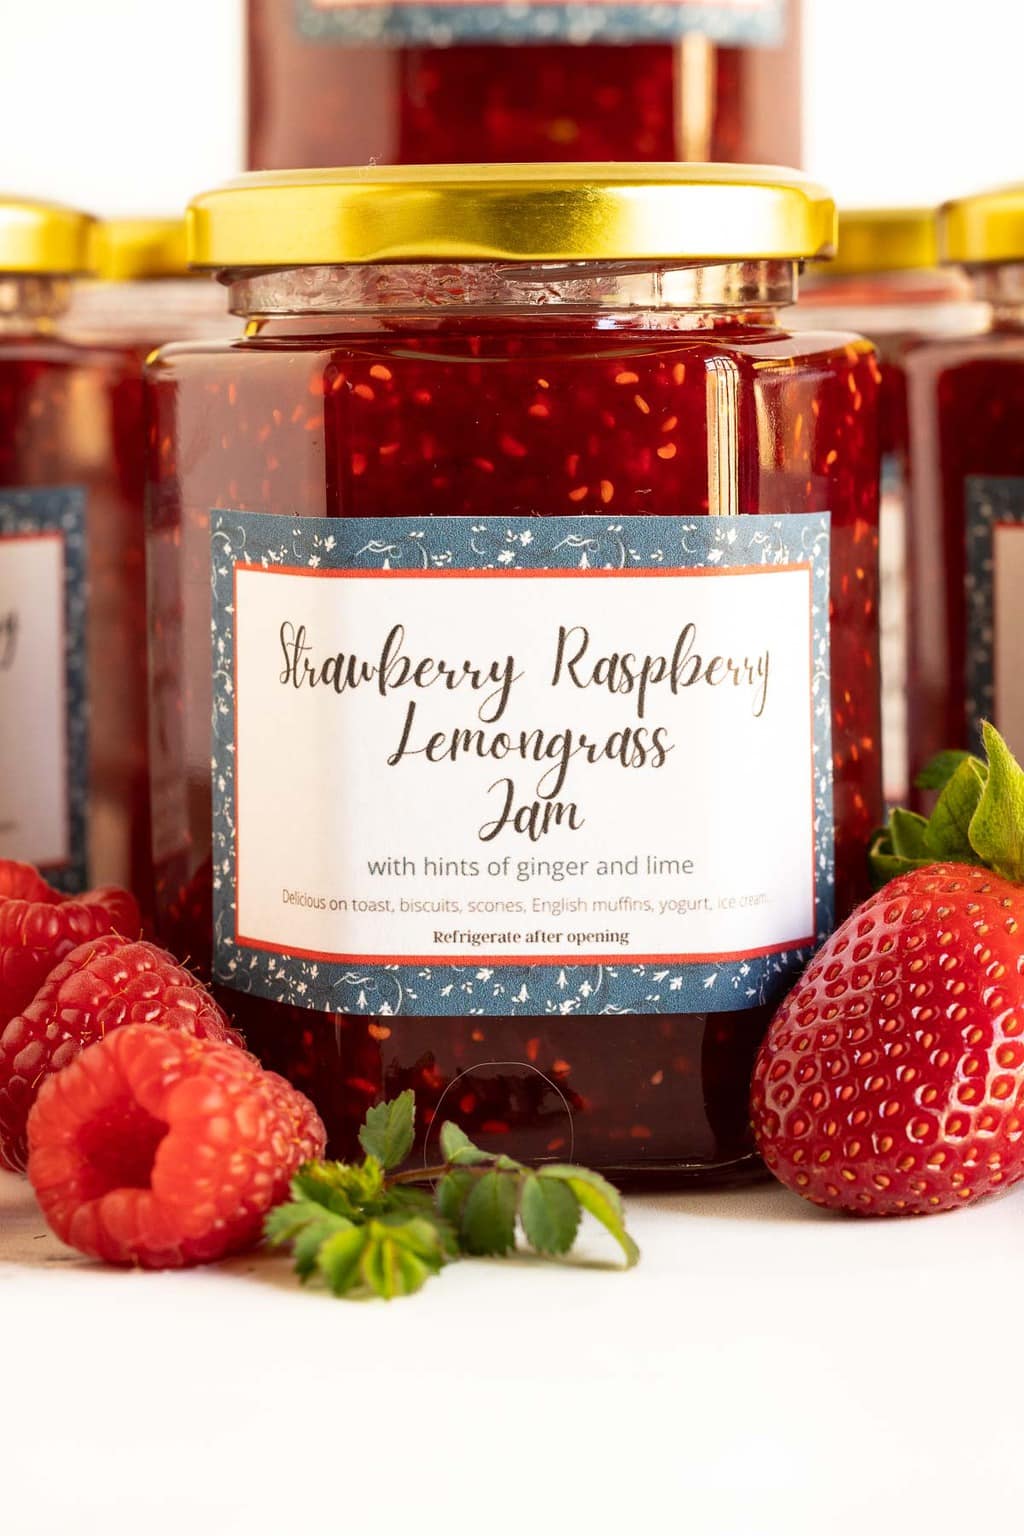 Vertical ultra closeup photo of jars of Strawberry Raspberry Lemongrass Jam featuring custom gift labels for the jars.